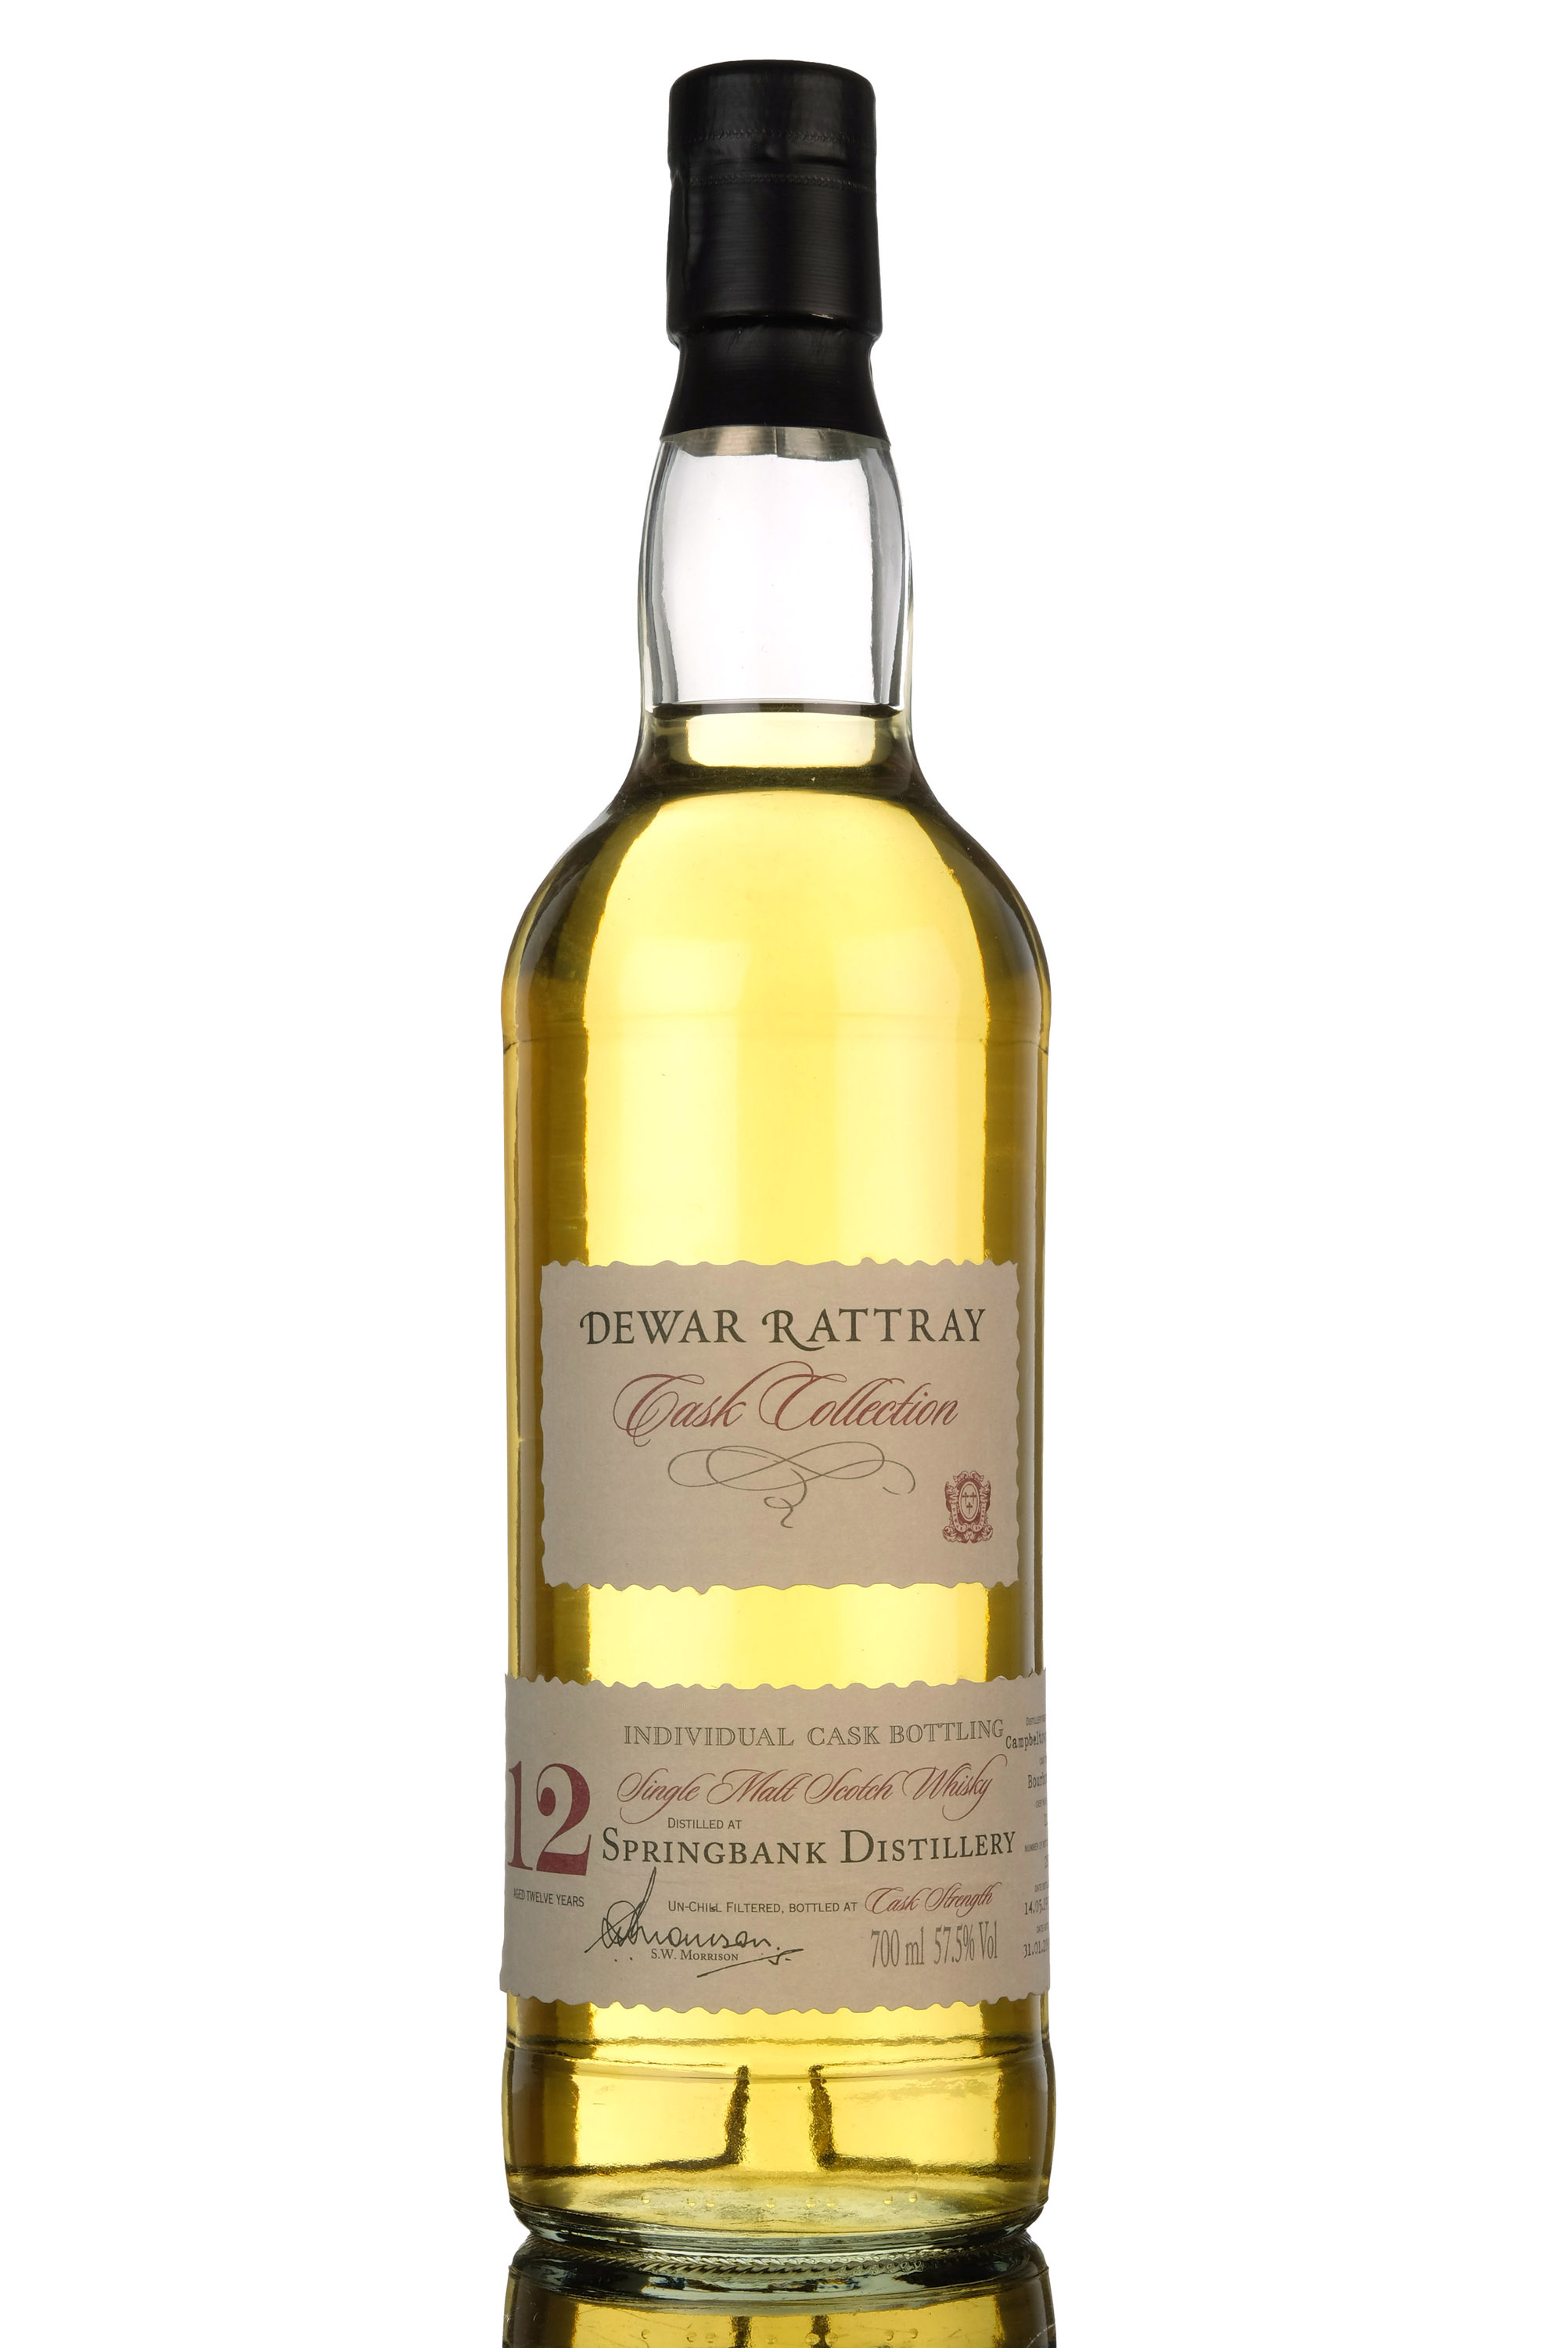 Springbank 1993-2006 - 12 Year Old - Dewar Rattray Cask Collection - Single Cask 212